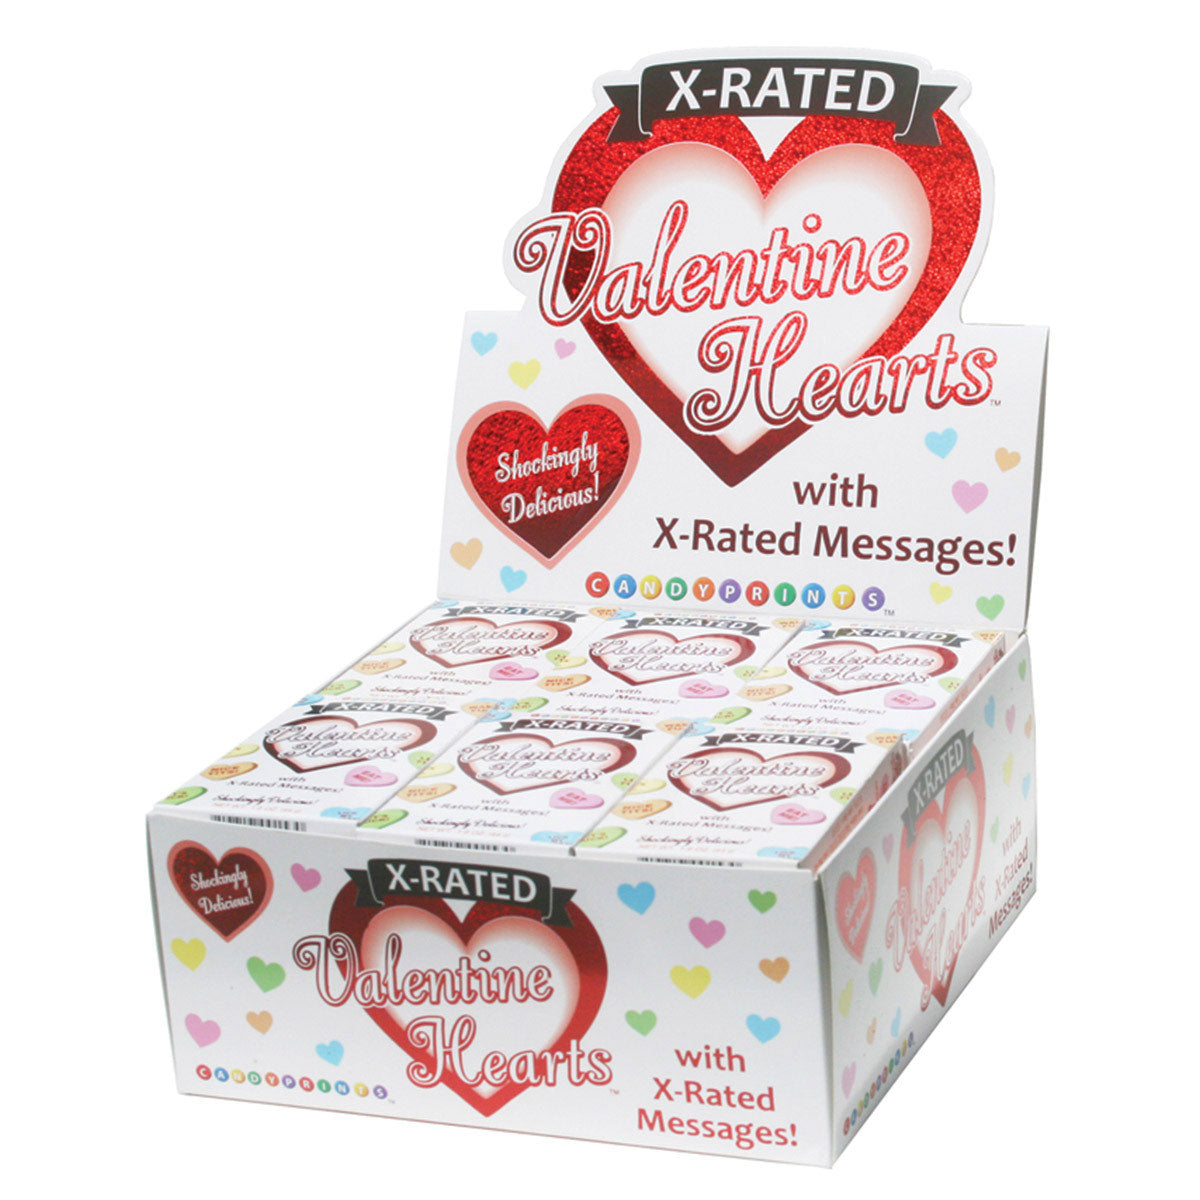 X-Rated Valentine Hearts Candy 24pc Display